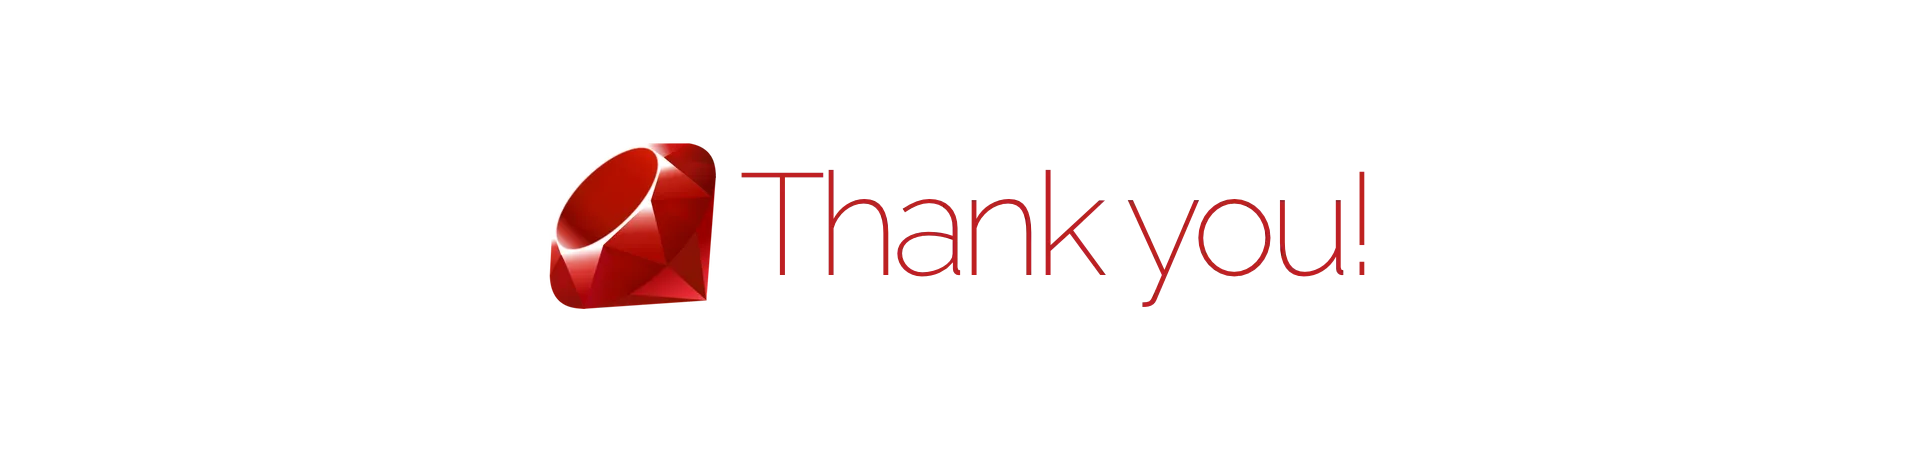 The Ruby logo and the text 'Thank you'